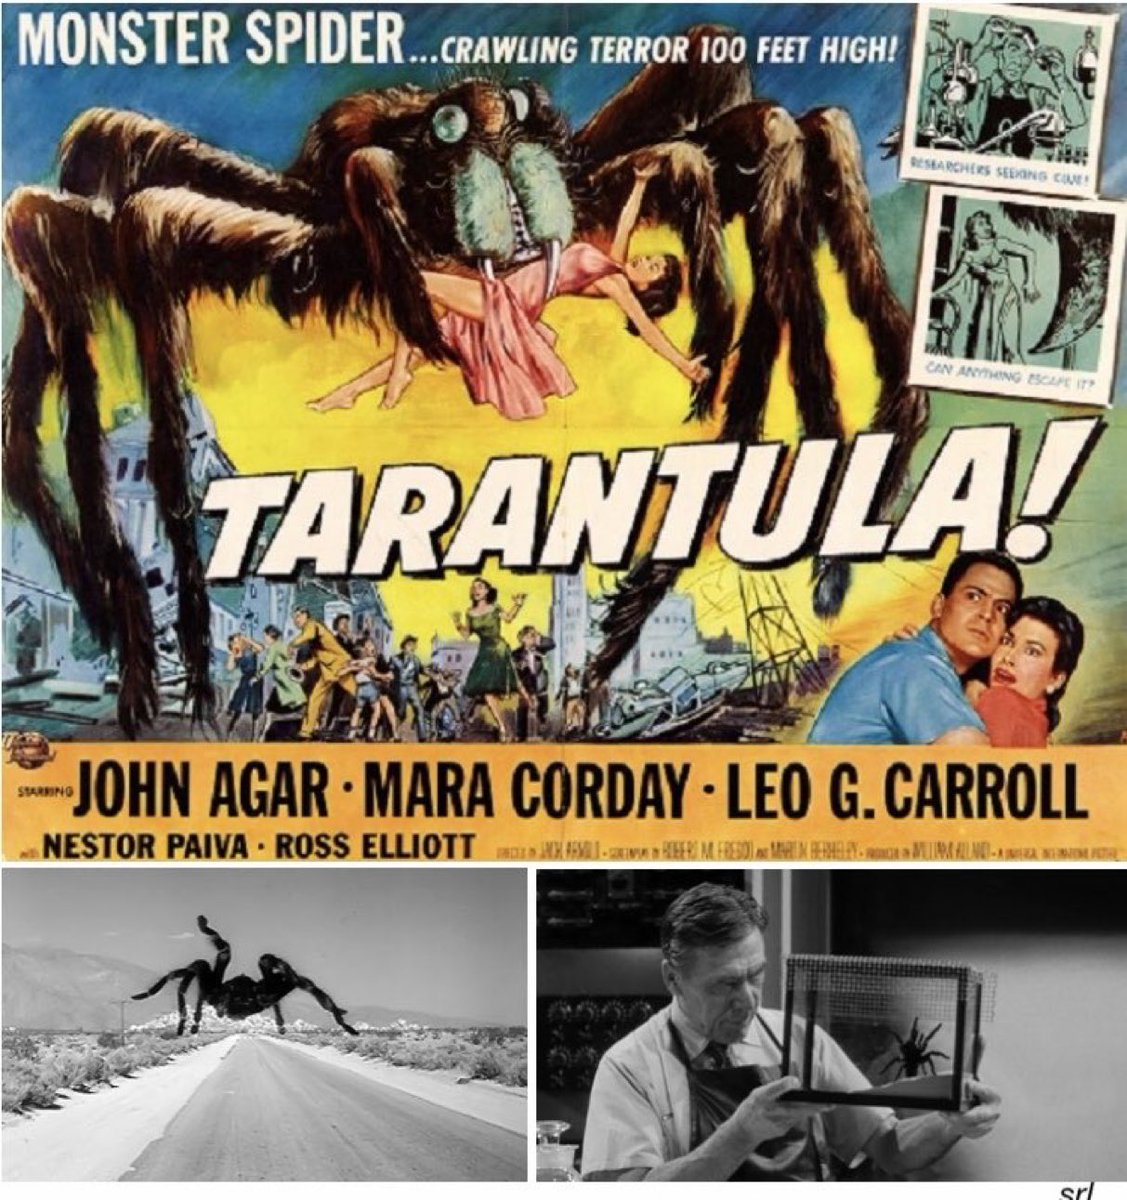 2:55pm TODAY on @Legend__Channel 

The 1955 #SciFi #Horror film🎥 “Tarantula” directed by #JackArnold from a screenplay by #RobertMFresco & #MartinBerkeley

Inspired by #RobertMFresco’s #ScienceFictionTheatre  teleplay📺 “No Food for Thought'

🌟#JohnAgar #MaraCorday #LeoGCarroll